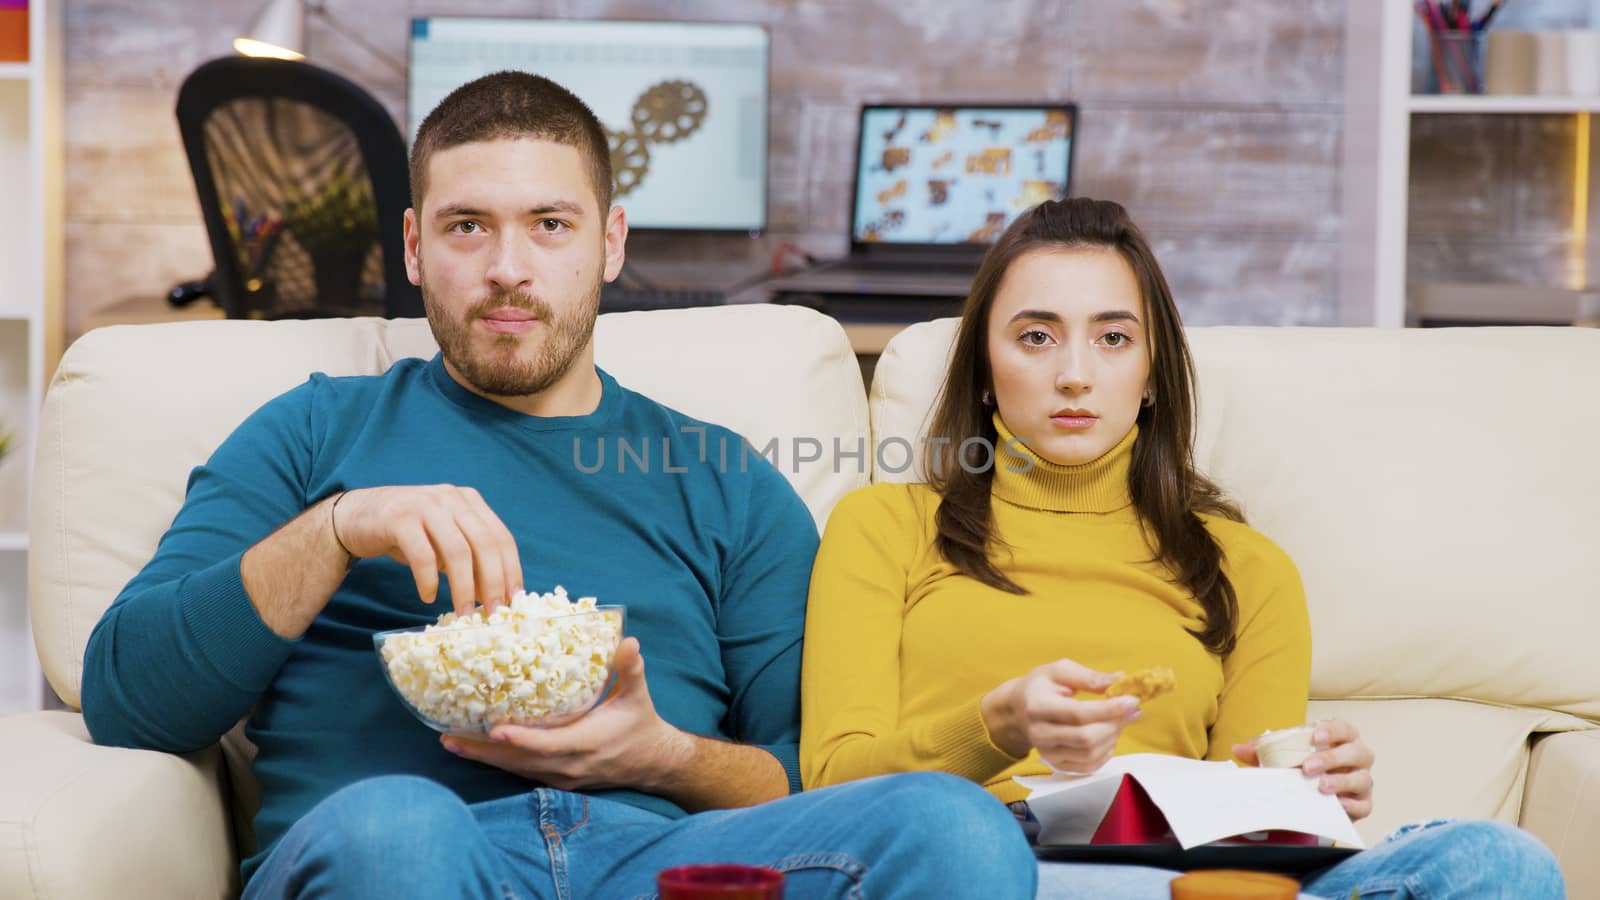 Scared couple watching tv eating pizza and popcorn sitting on couch by DCStudio